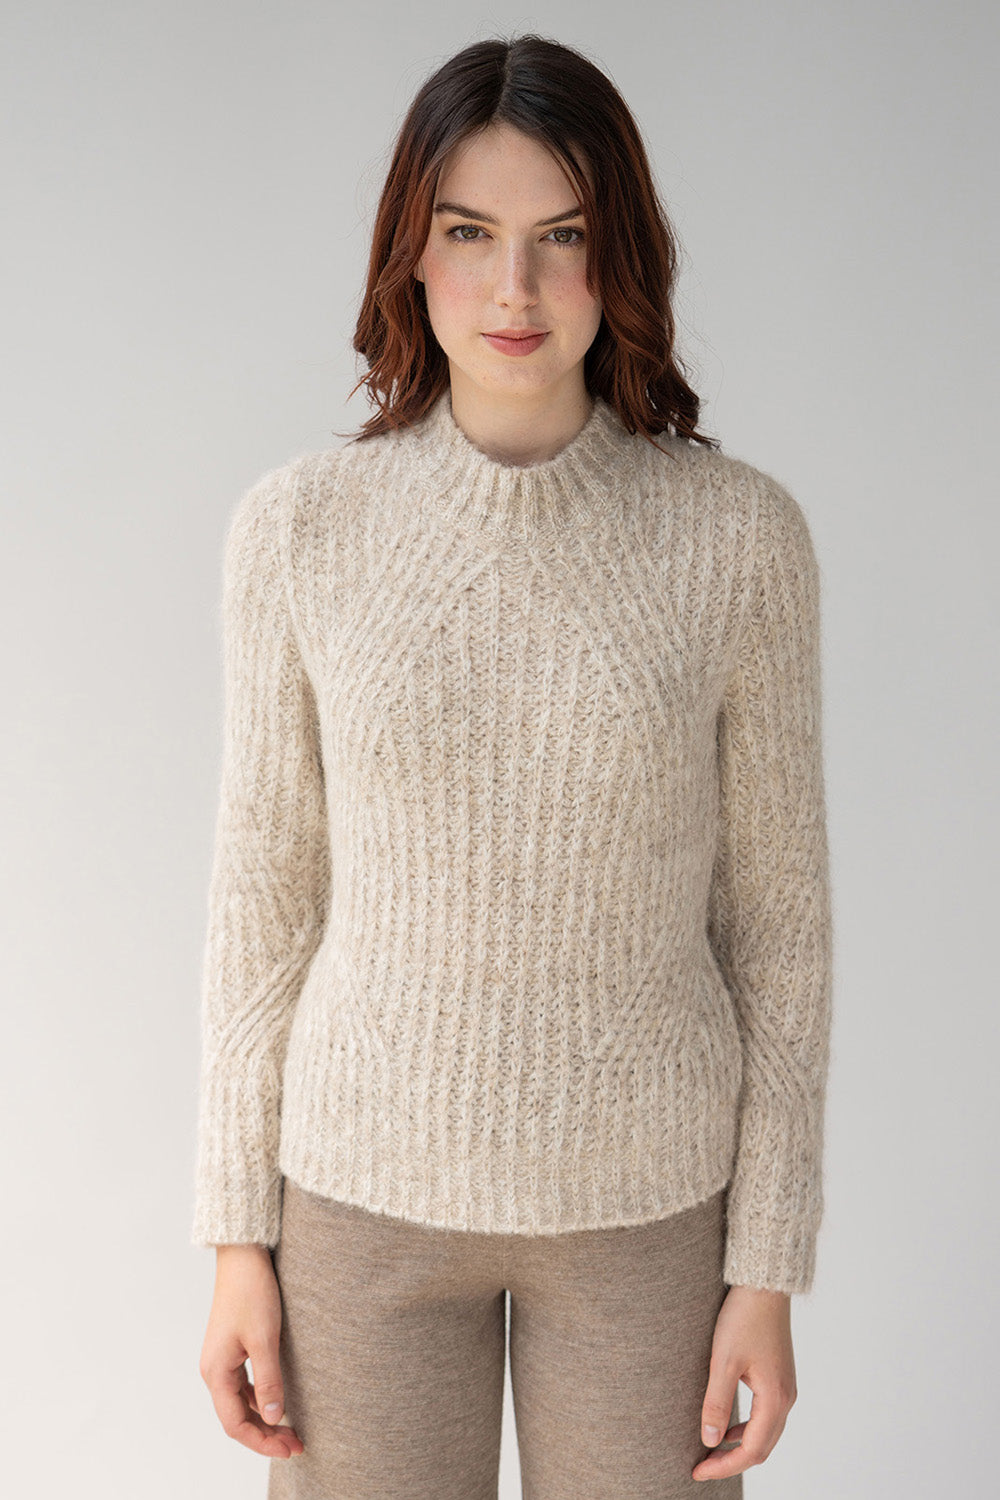 Vik transfer rib pullover in oat ivory marl made in Peru from alpaca features a rib stitch for a slimmer silhouette